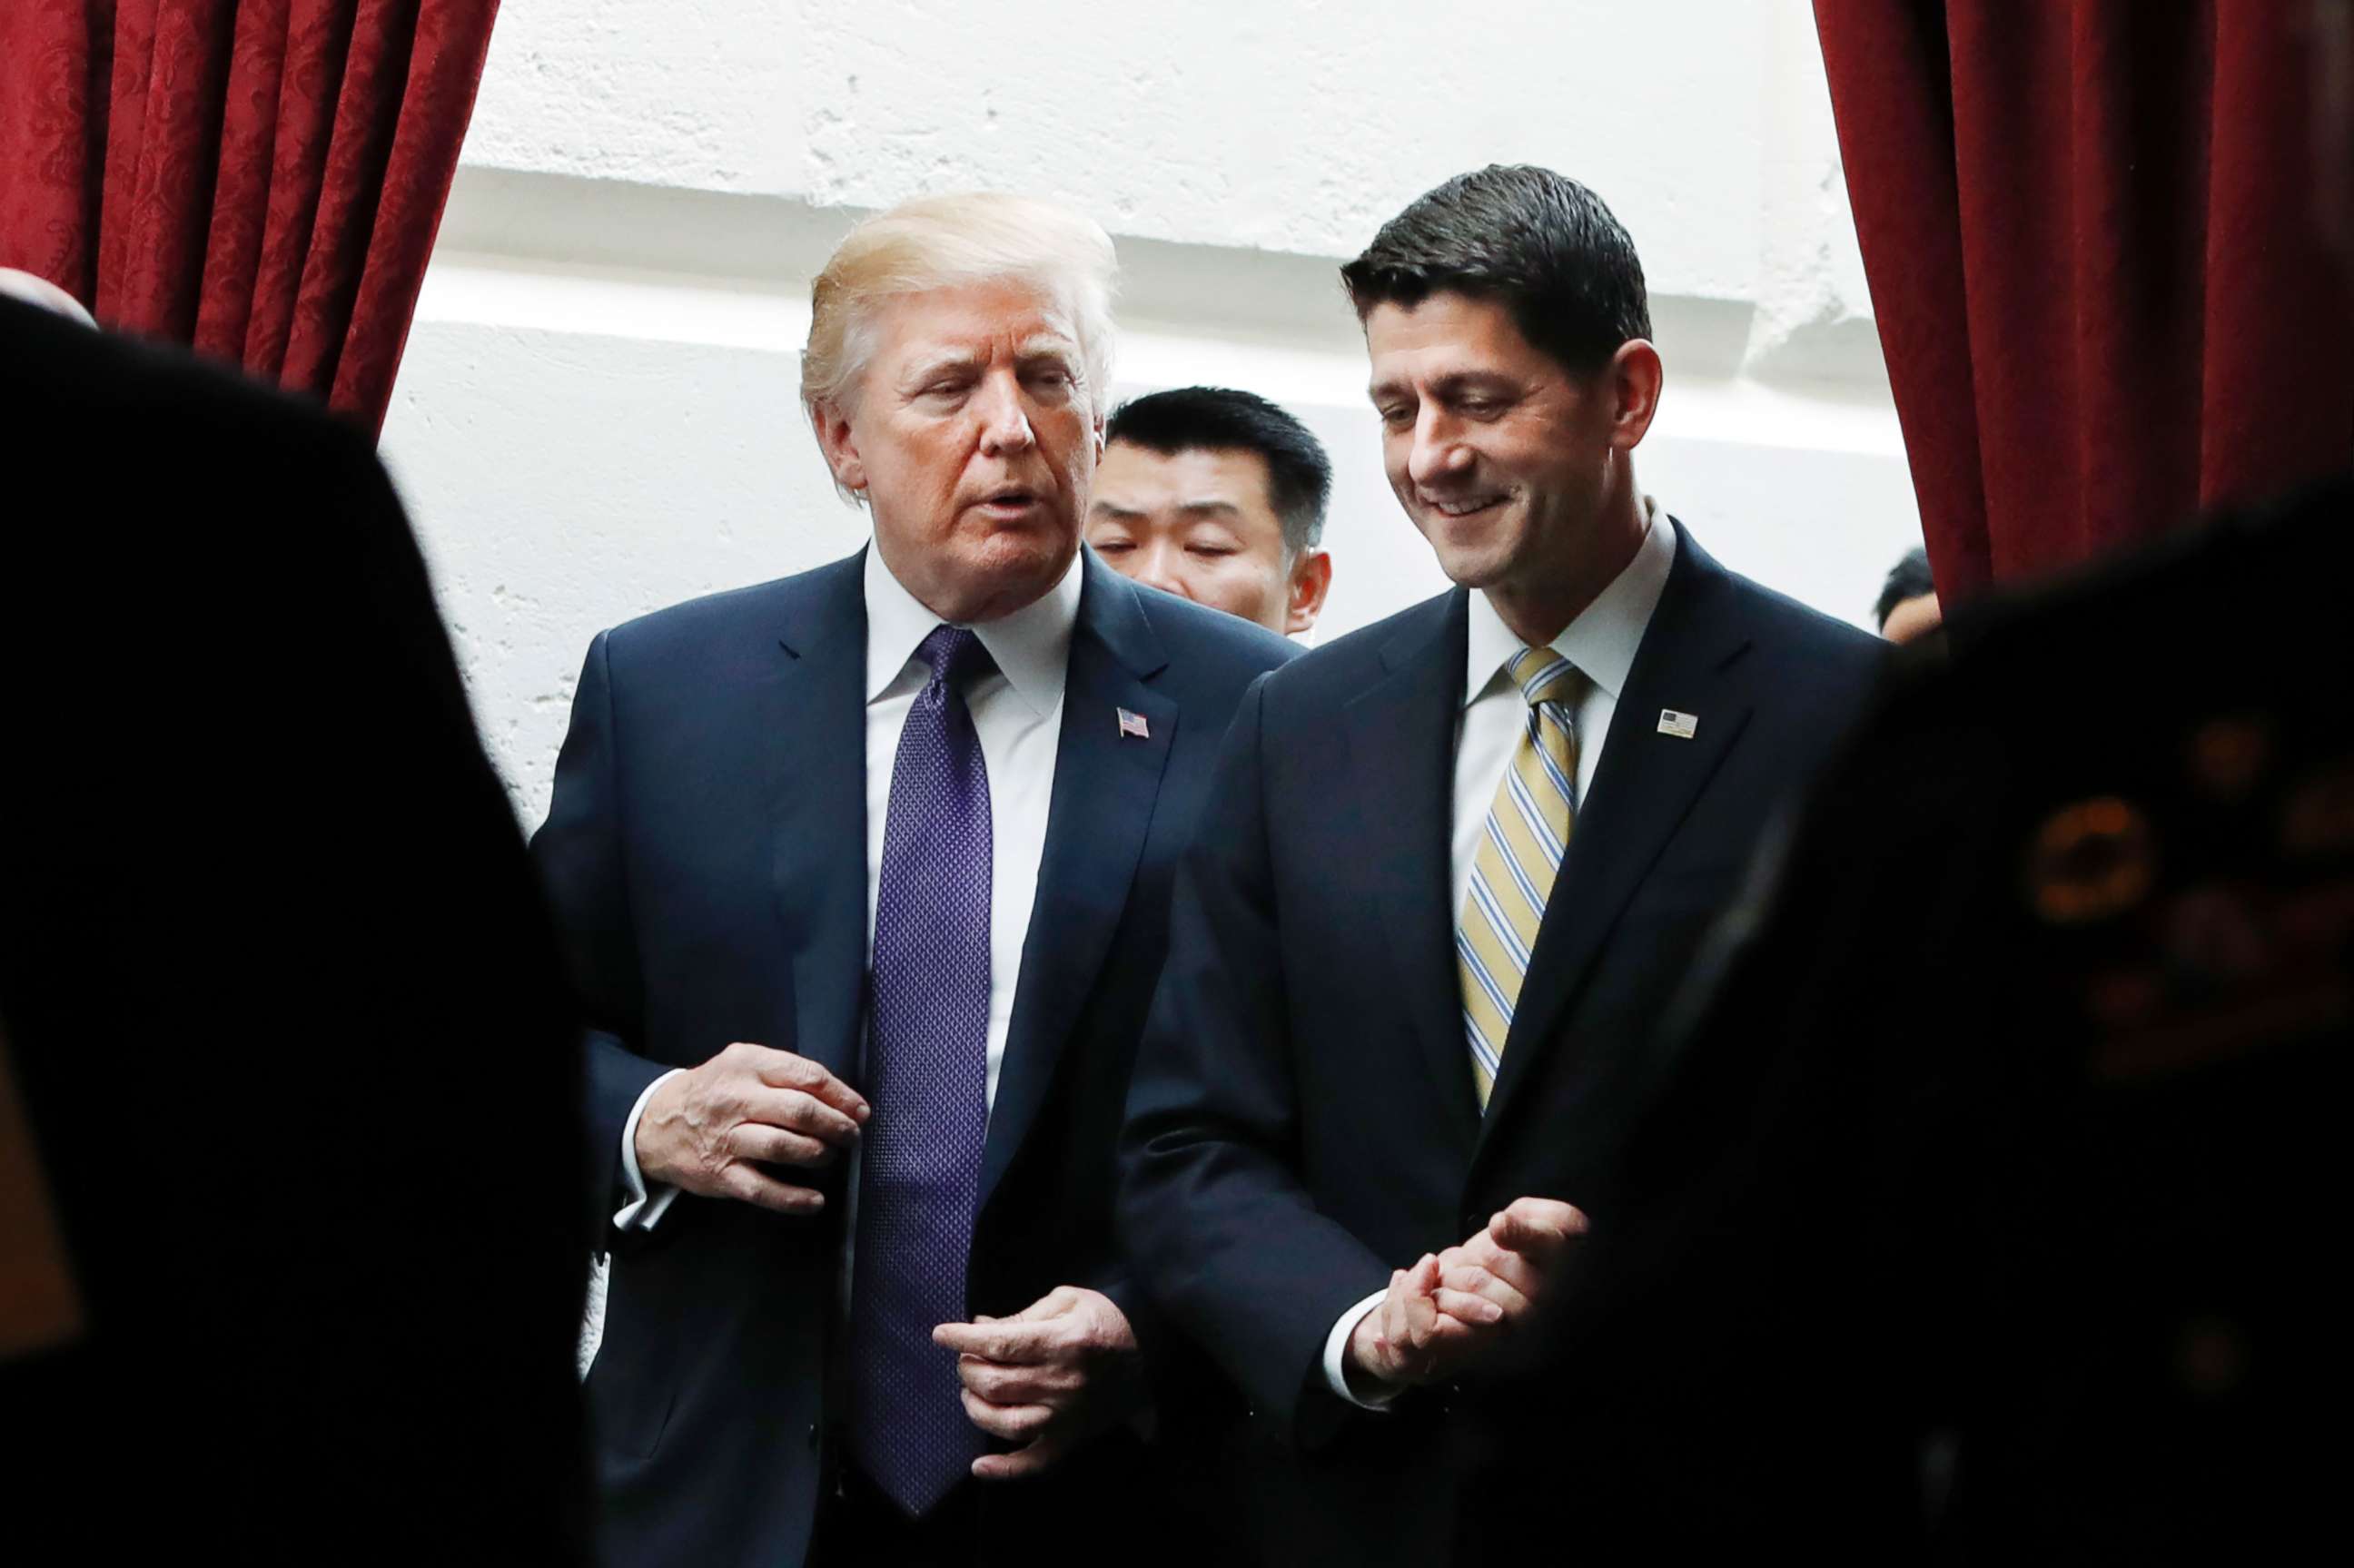 PHOTO: President Donald Trump walks with House Speaker Paul Ryan on  Nov. 16, 2017, as they leave a meeting with House Republicans on Capitol Hill.